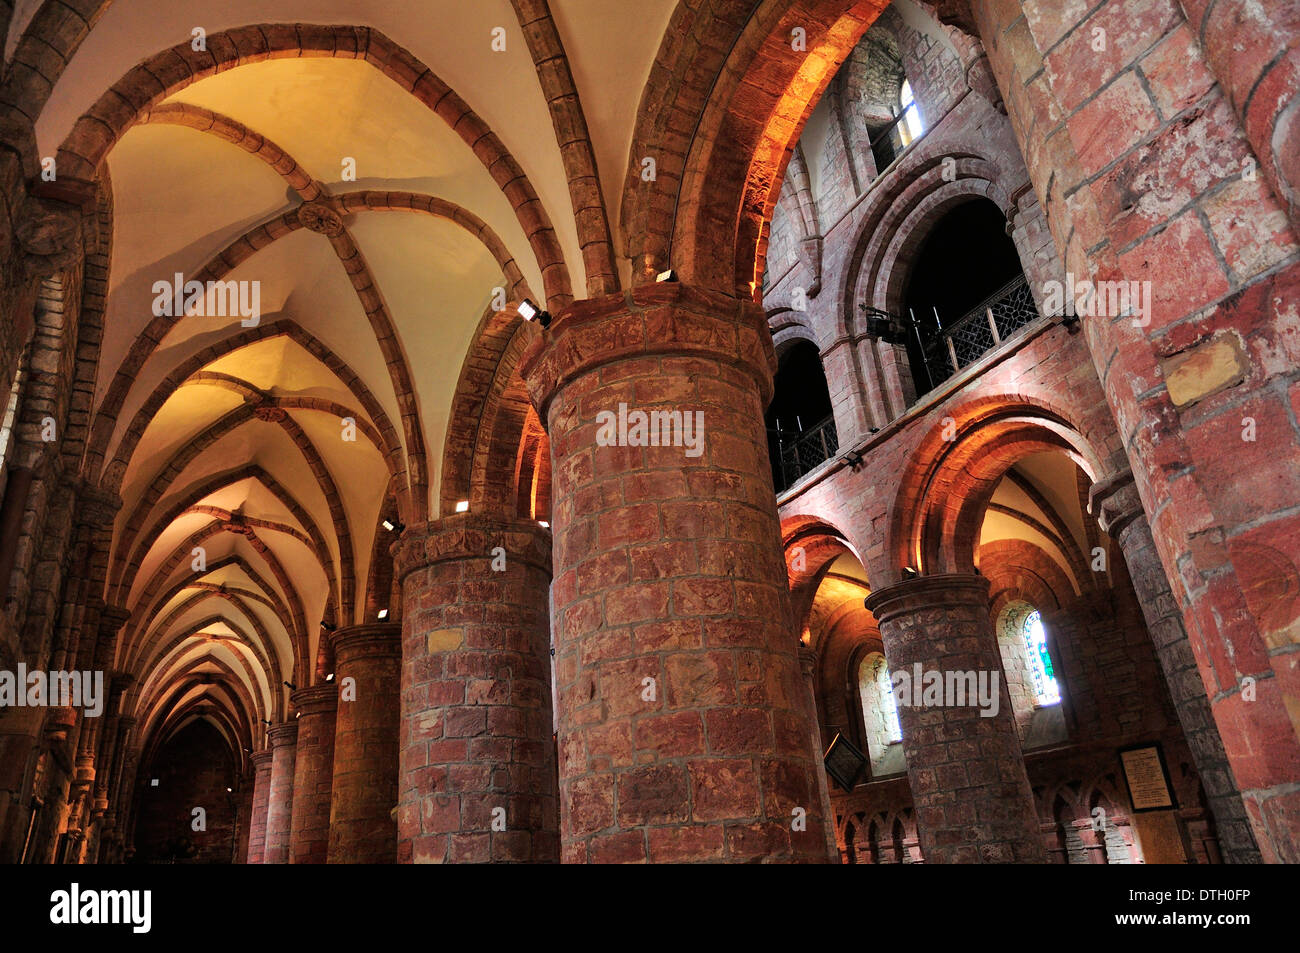 Interior of St Magnus Cathedral, Romanesque-Norman architecture, 12th century, Kirkwall, Mainland, Orkney, Scotland Stock Photo